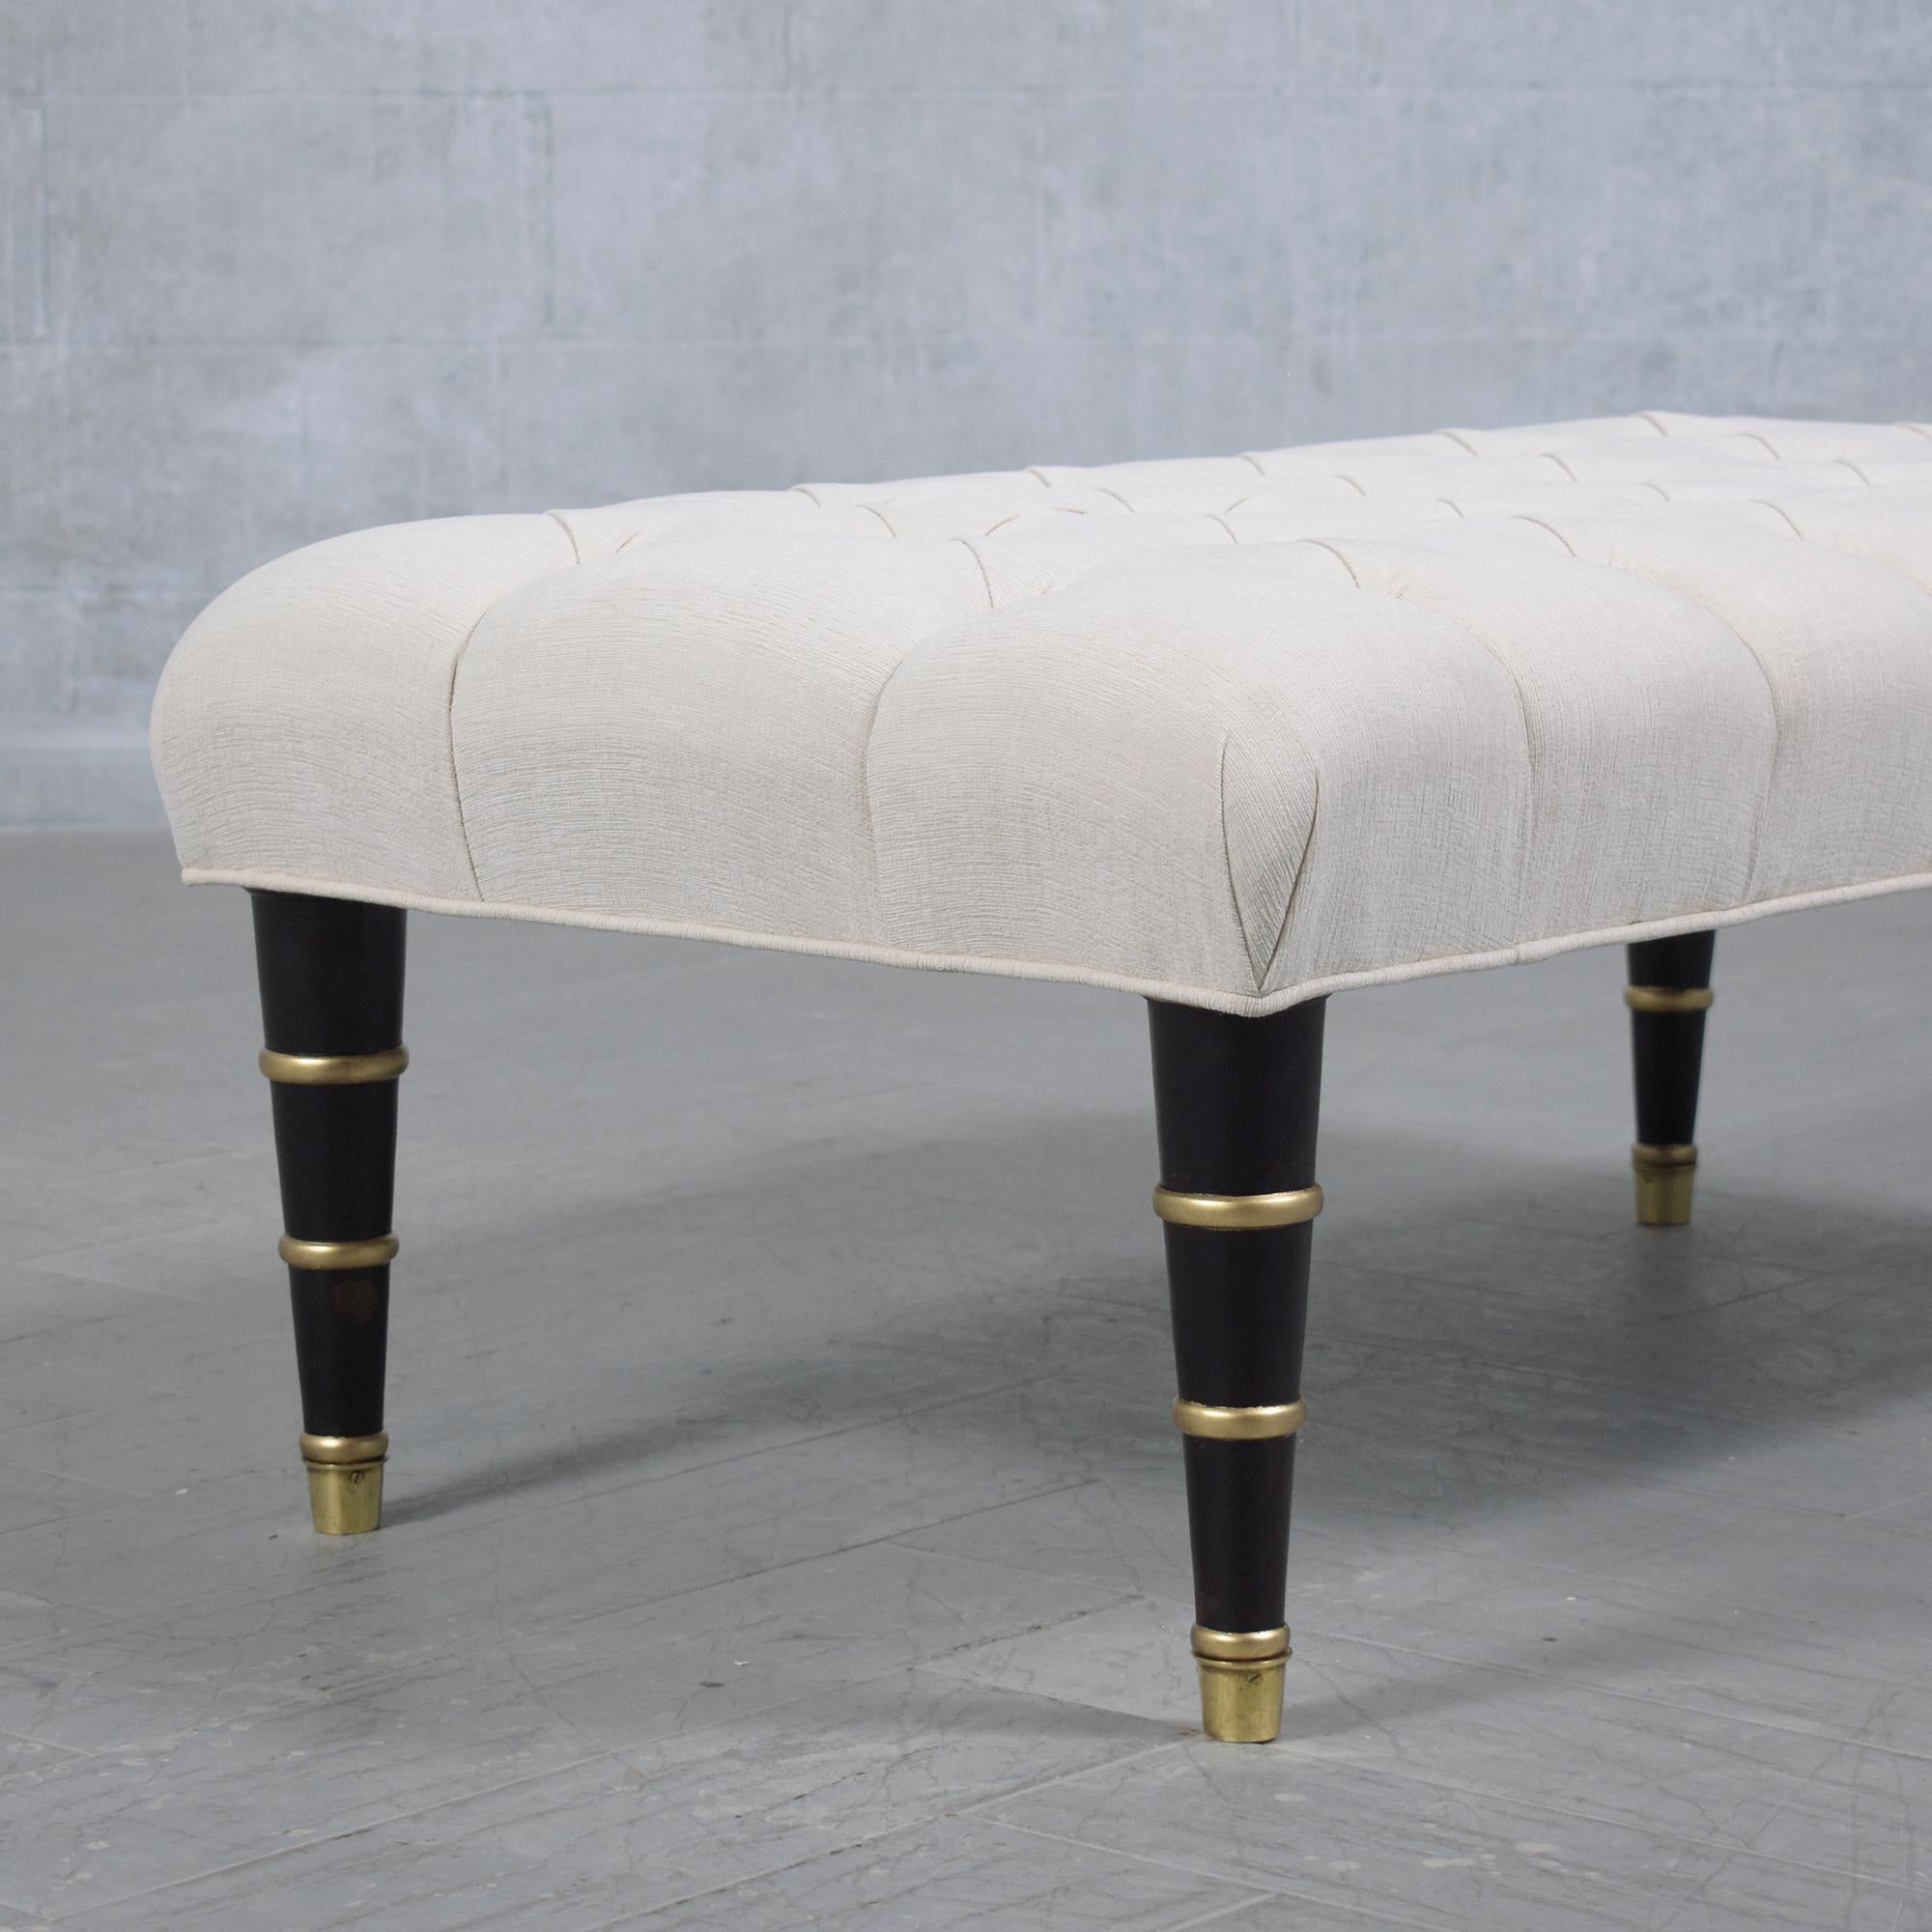 Hand-Crafted Restored Regency-Style Mahogany Bench with Tufted Chenille Upholstery For Sale